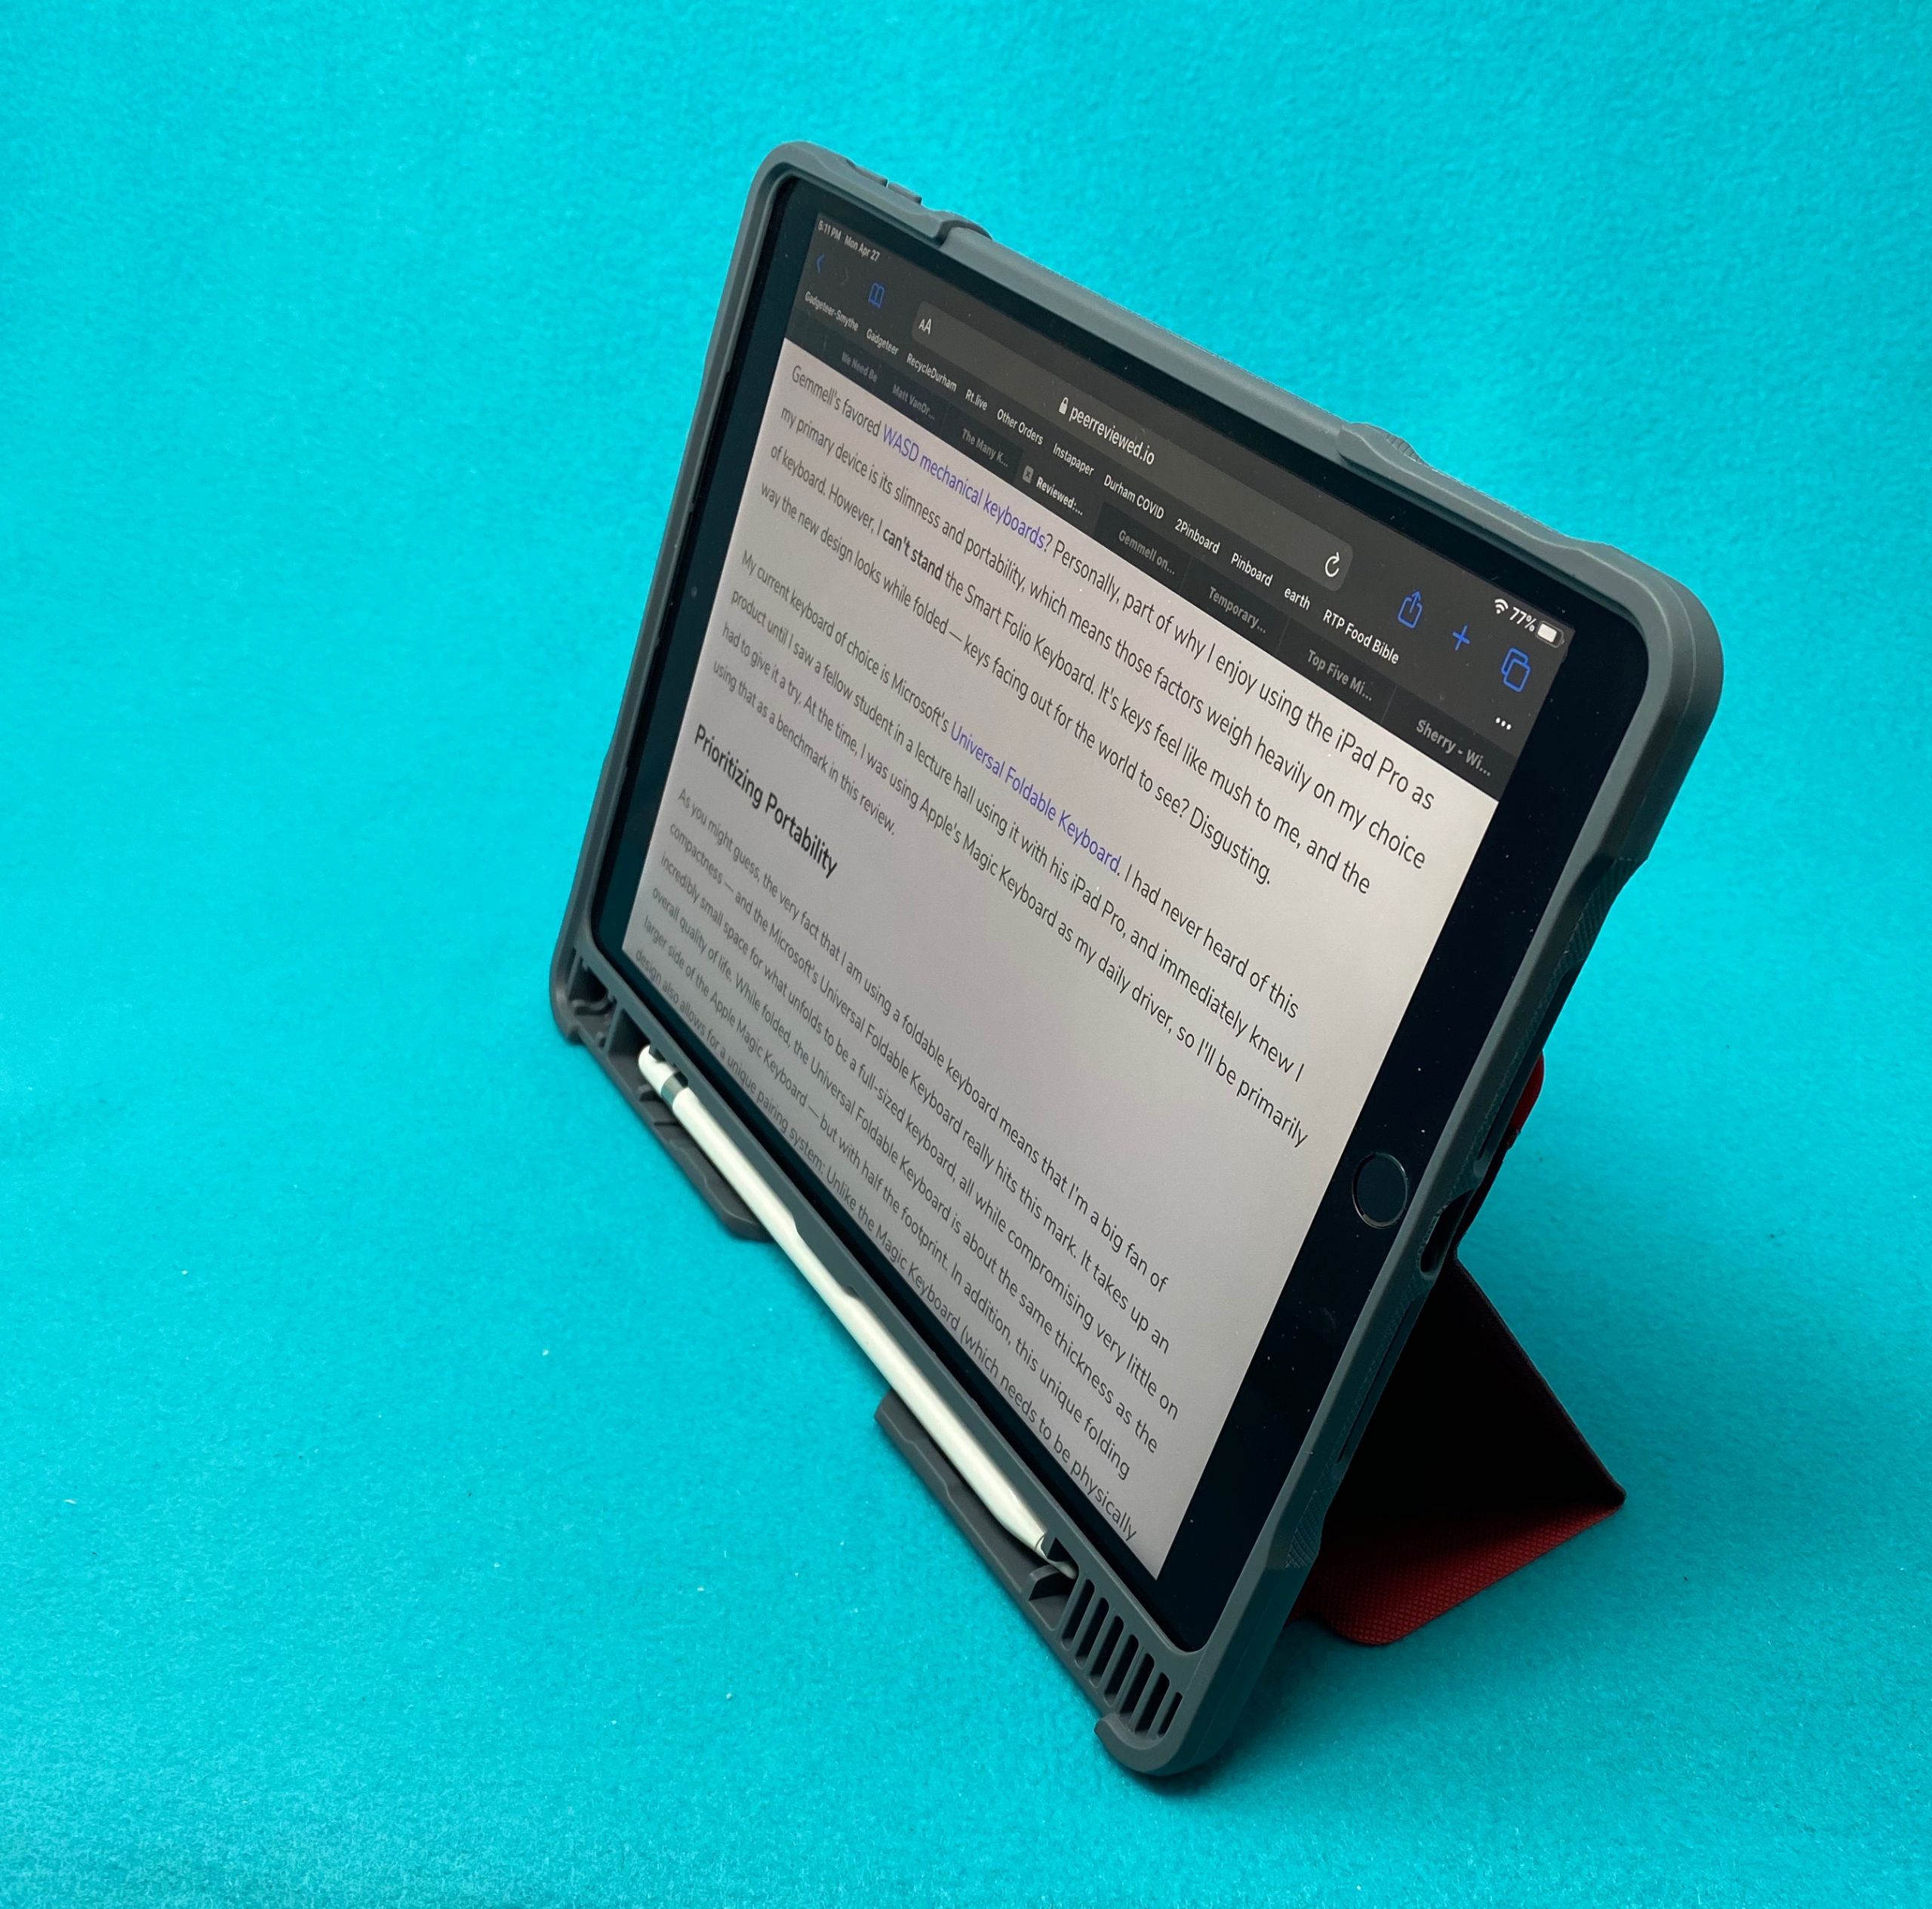 STM DUX Plus Duo iPad cover review - The Gadgeteer